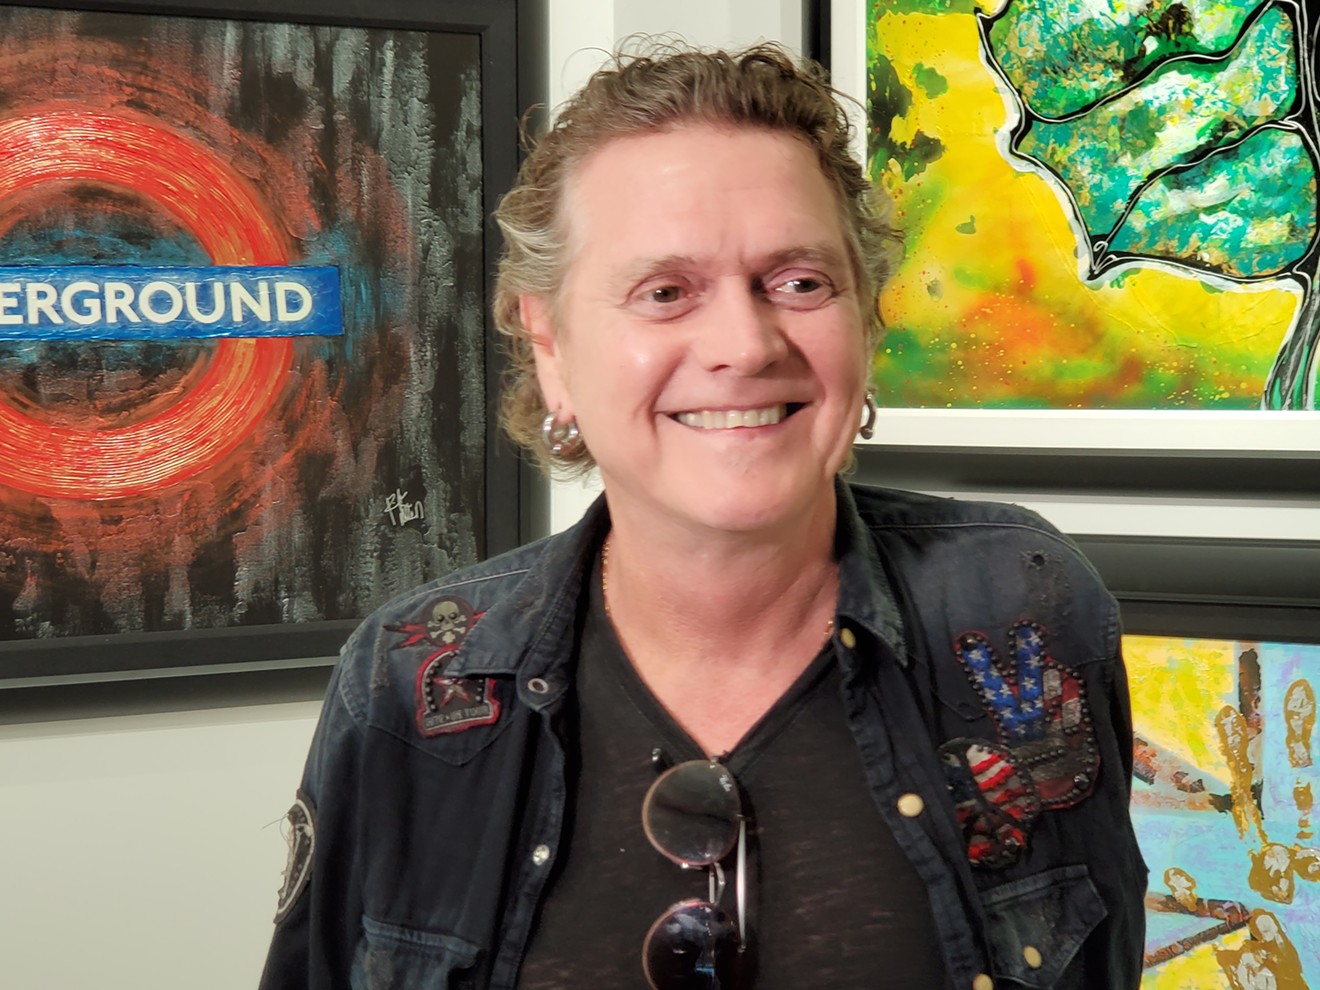 Def Leppard drummer Rick Allen will appear this weekend at his art exhibit at Wentworth Galleries in Fort Lauderdale, Hollywood, and Boca Raton.